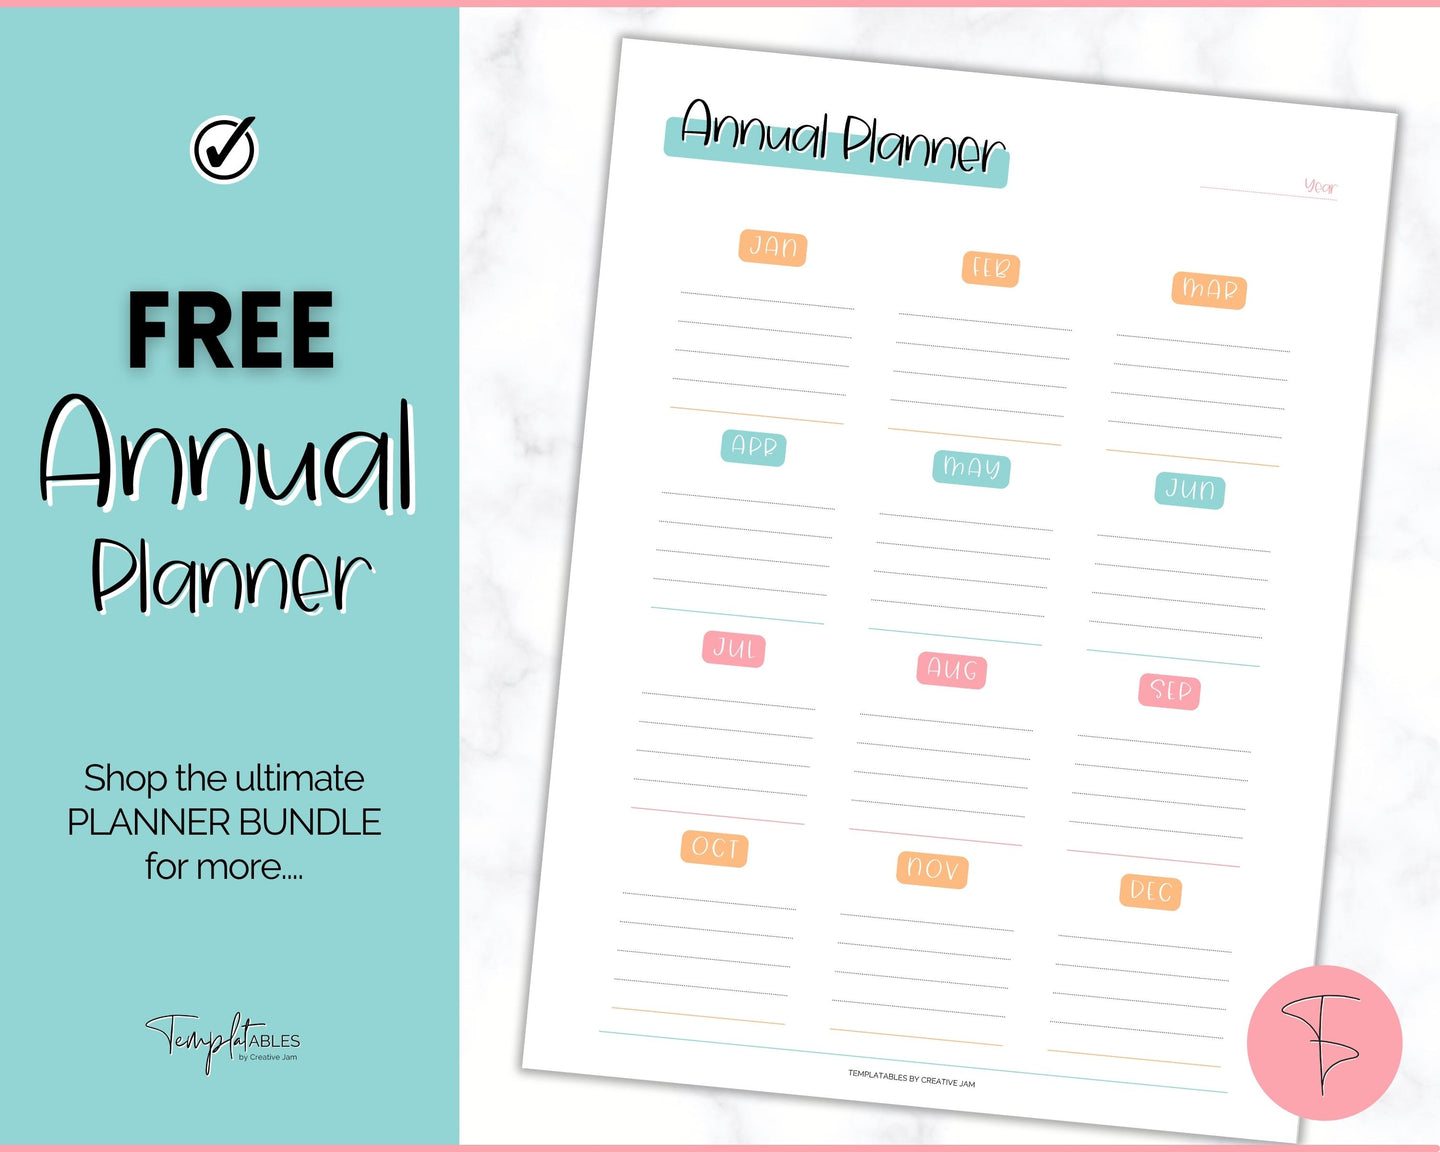 FREE - Annual Planner Printable, Annual Calendar, To Do List Printable, Undated Schedule, Productivity Template | Colorful Sky